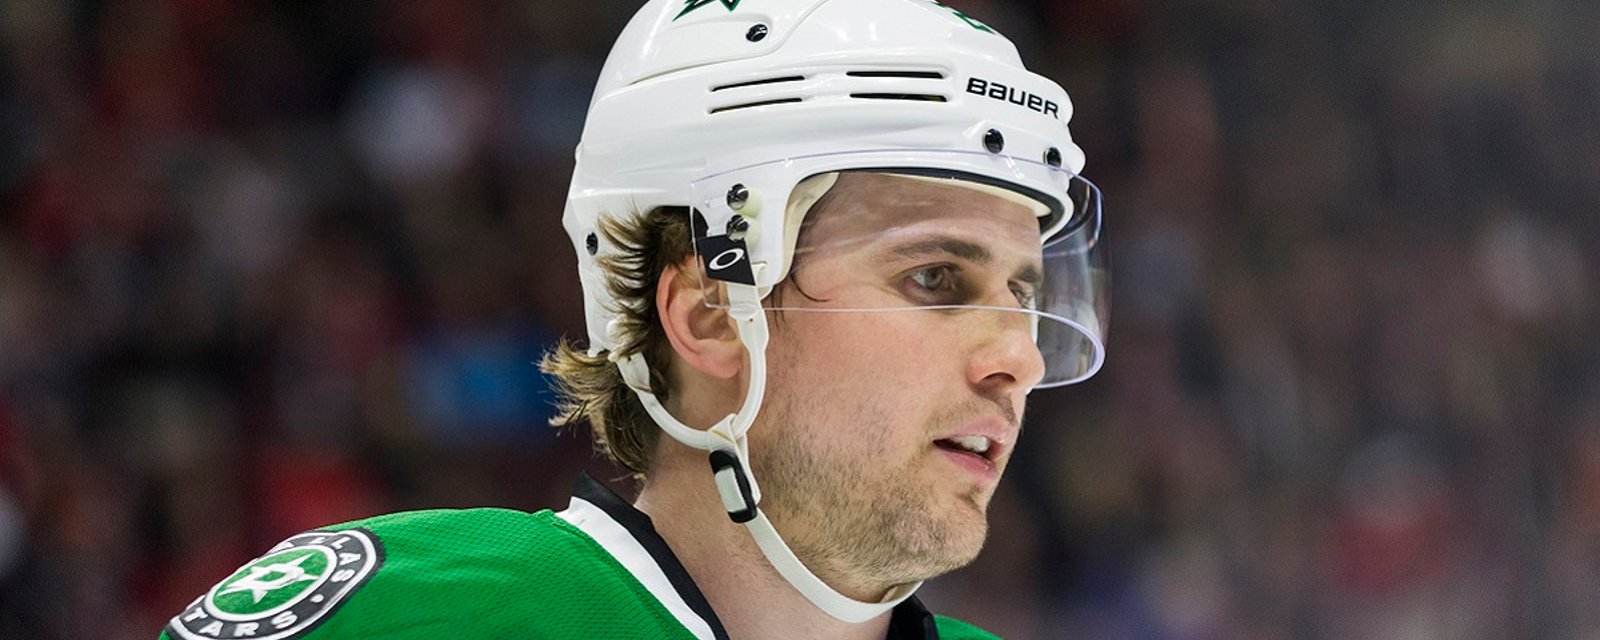 Breaking: Kris Russell has reportedly made his choice.